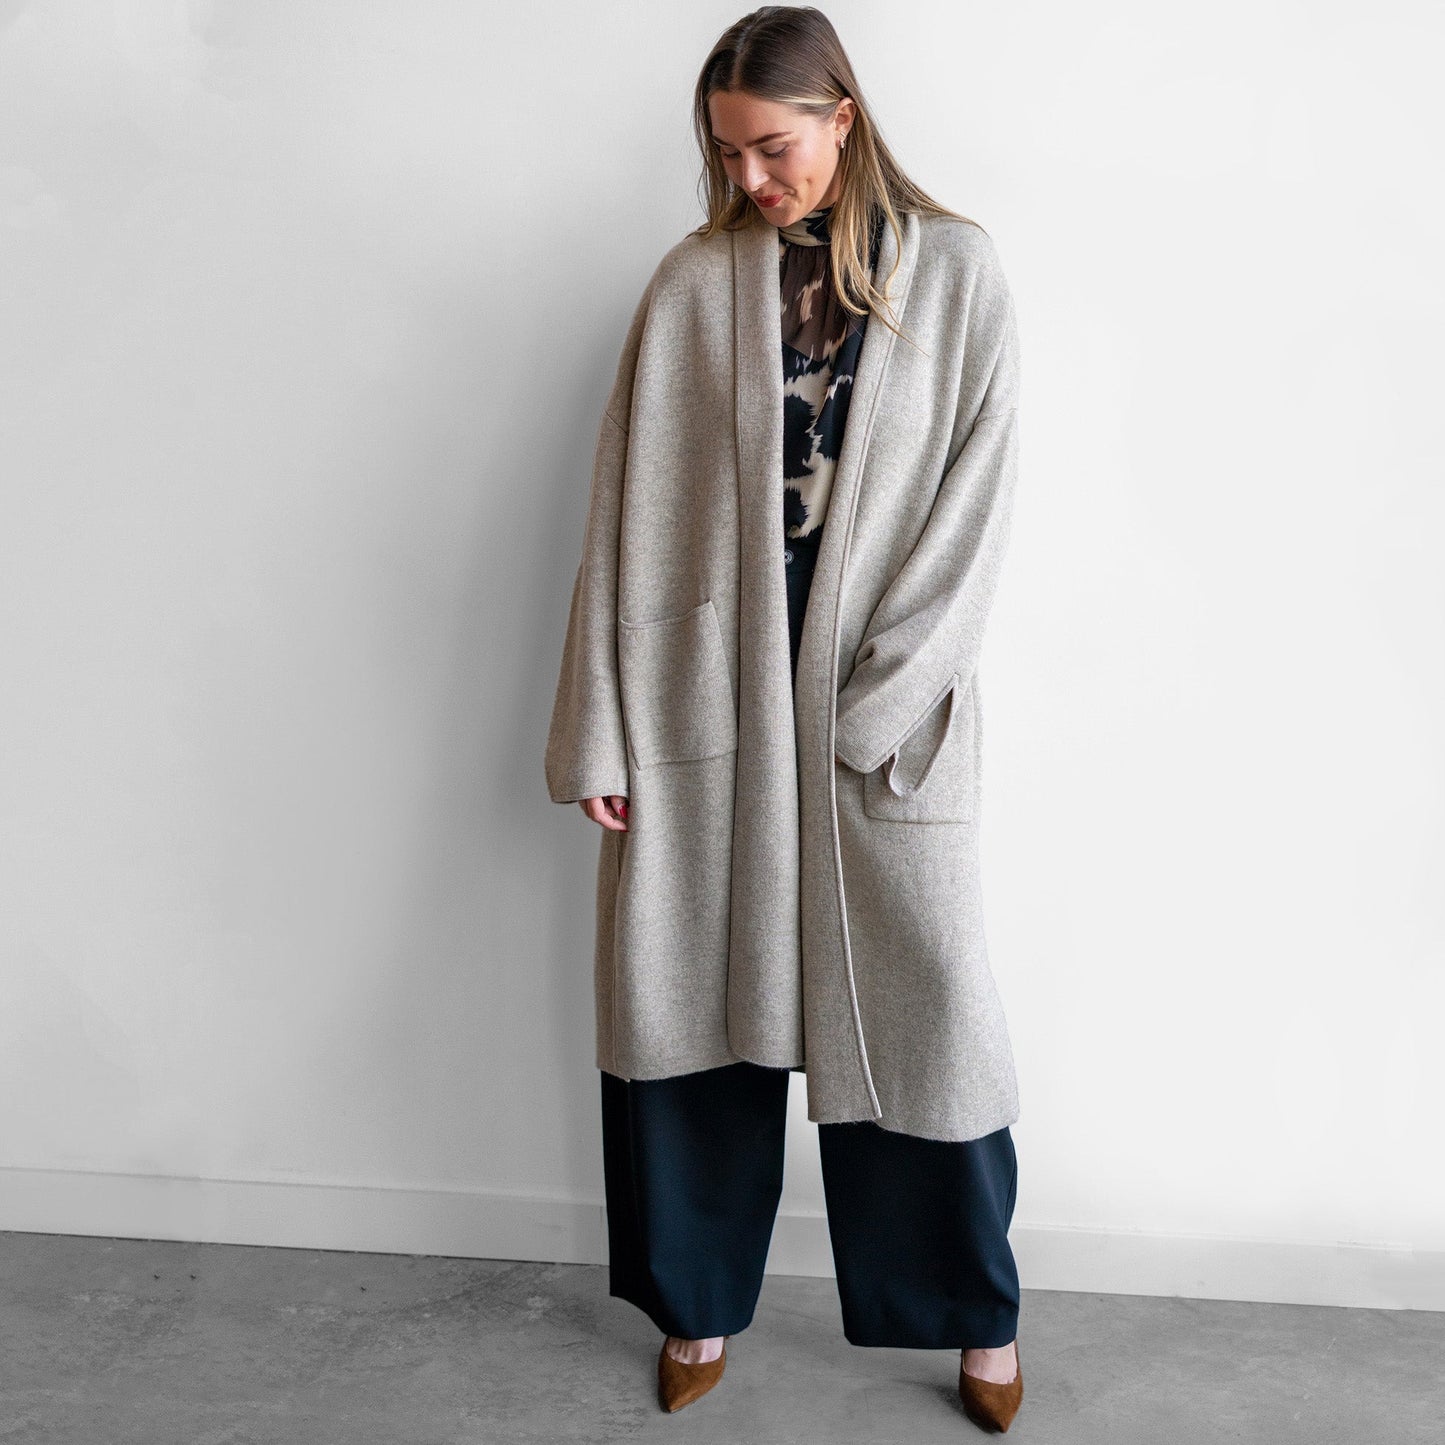 Open Cashmere Duster in Oatmeal